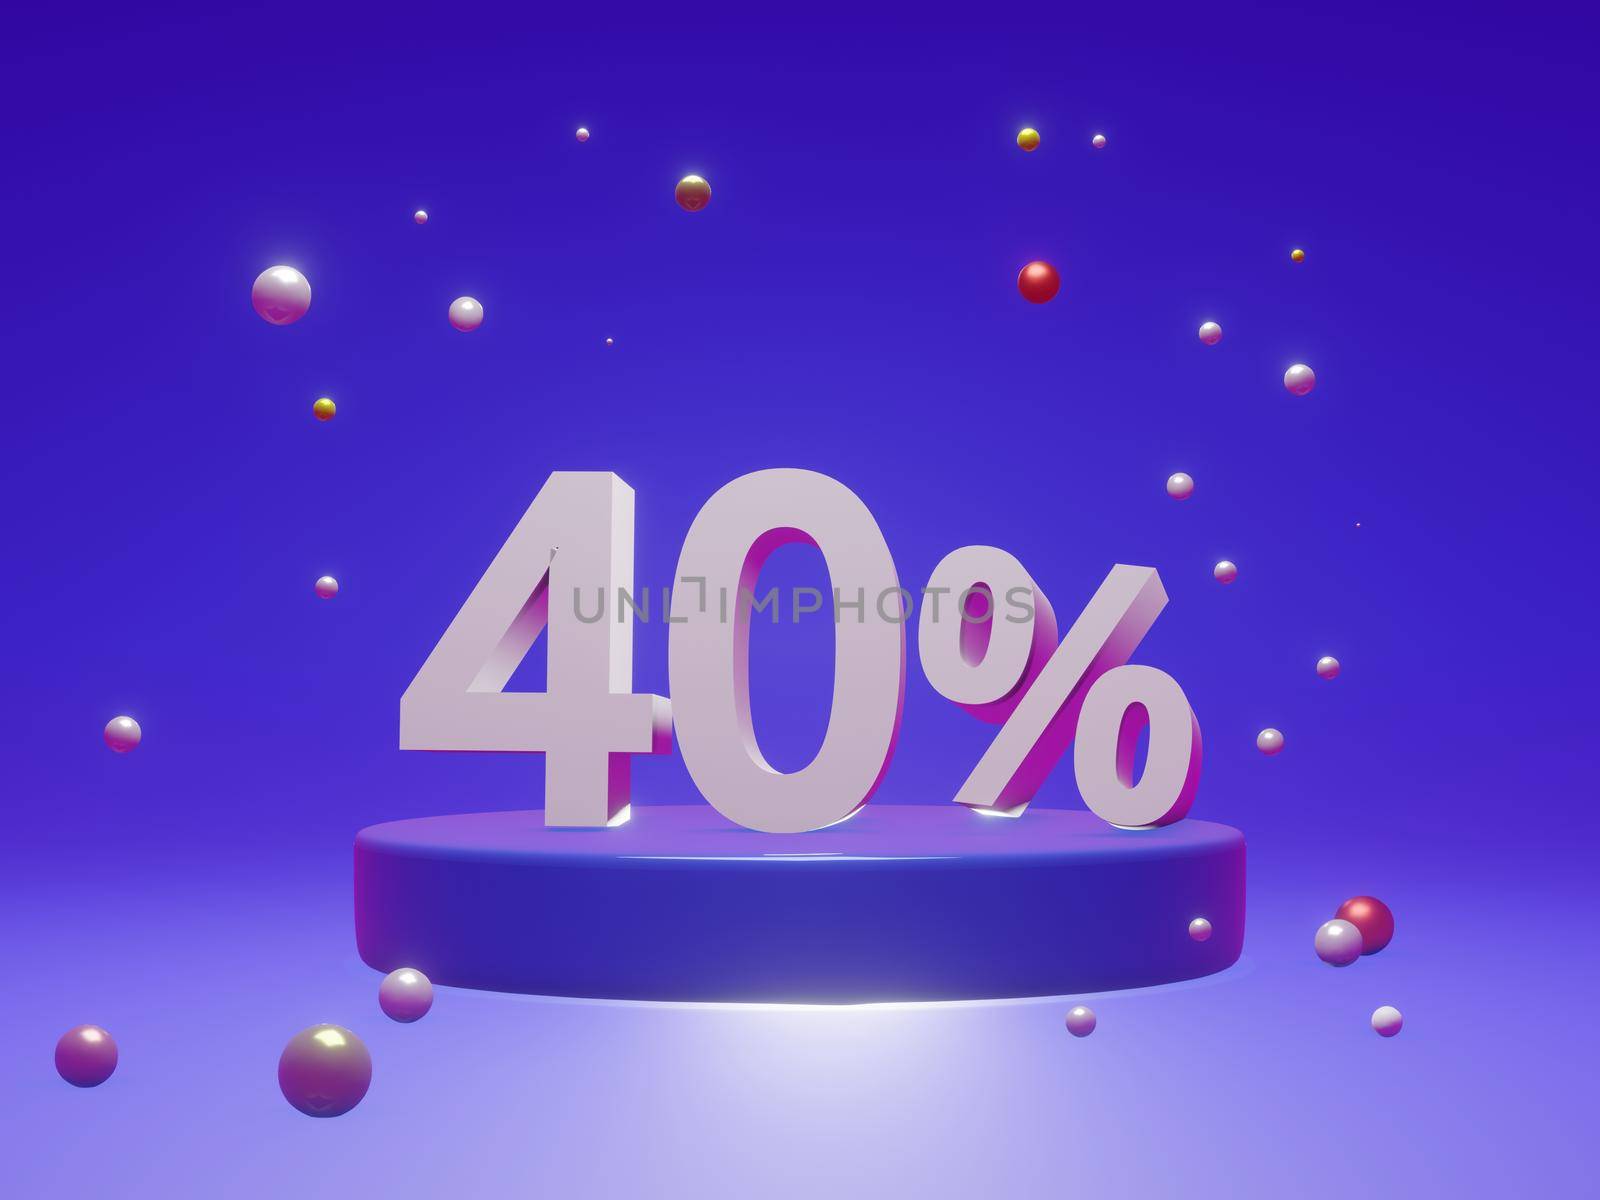 The podium shows up to 40% off discount concept banners, promotional sales, and super shopping offer banners. 3D rendering.